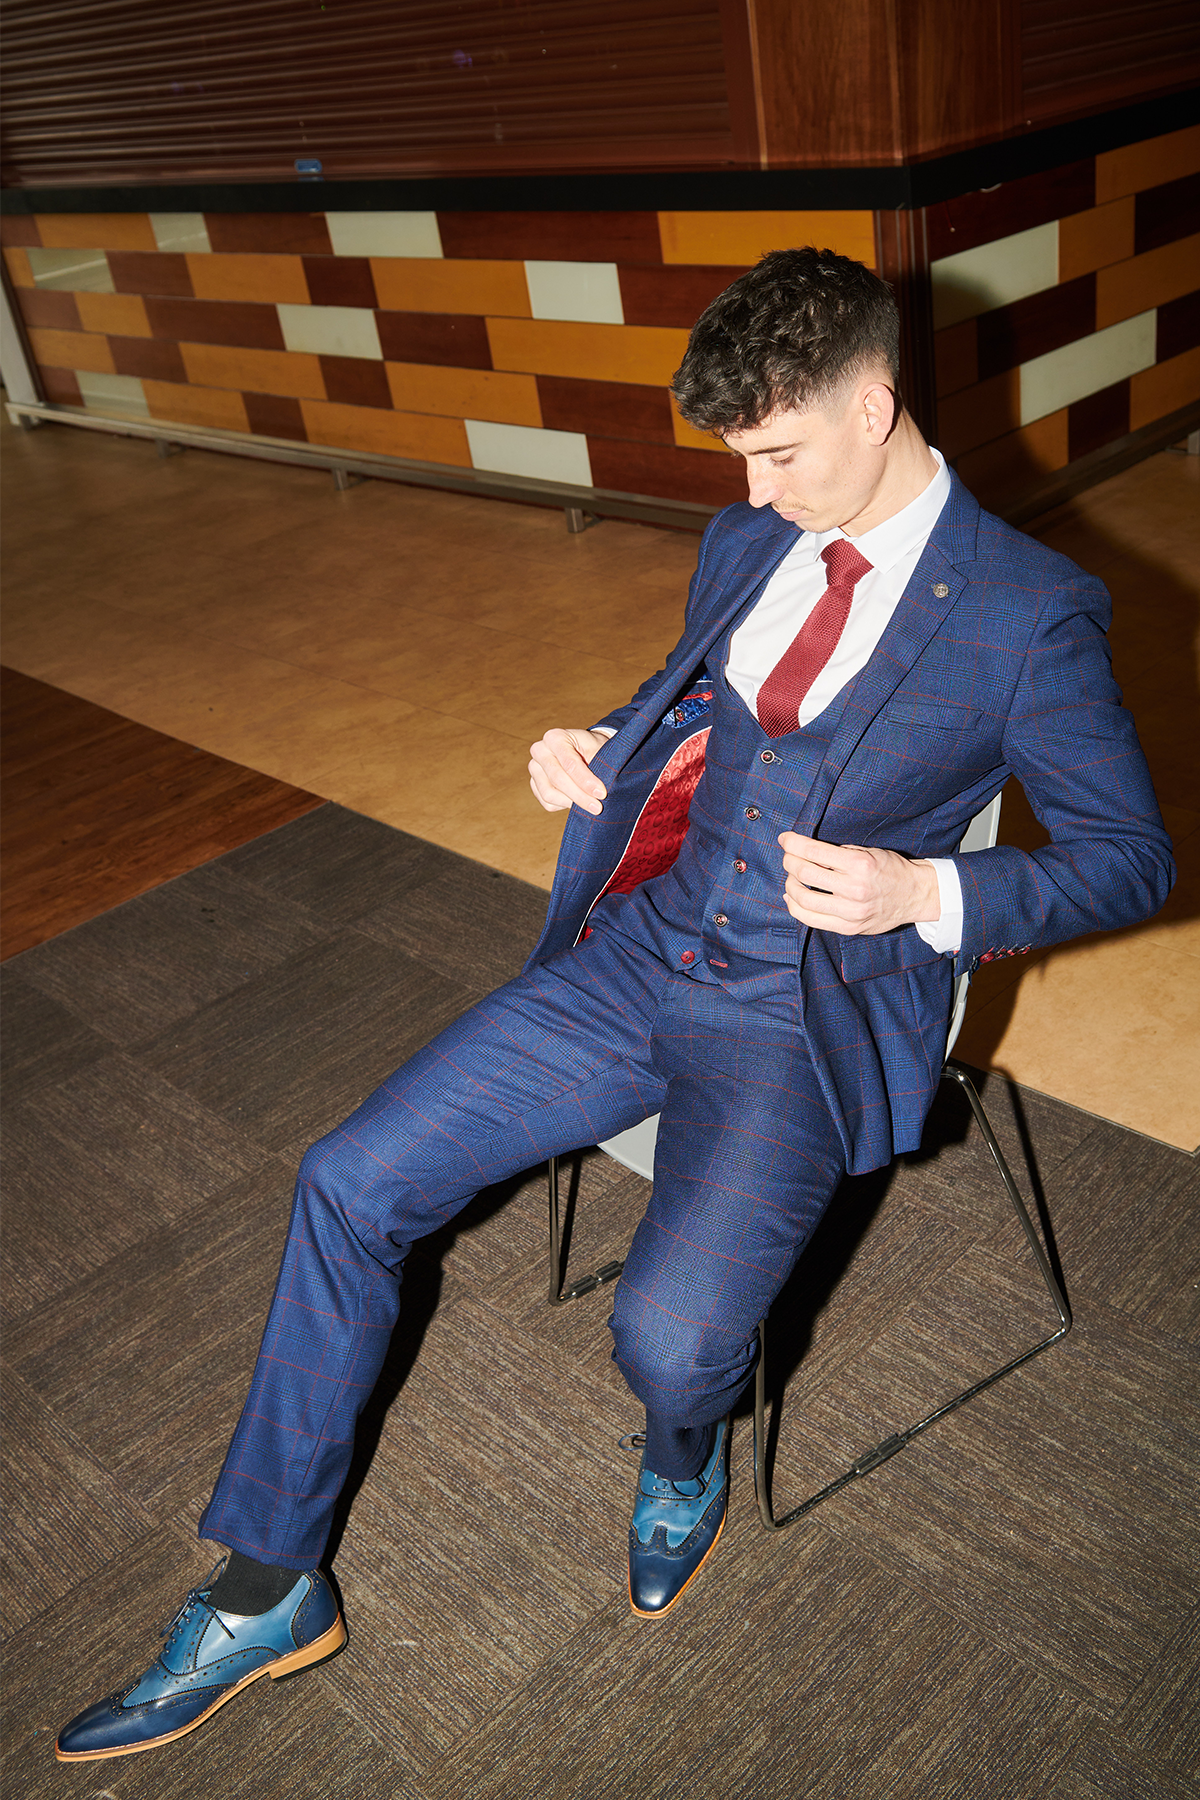 The Cardiff City F.C. Collection - Edinson Navy & Wine Check Suit As Worn By Callum O'Dowda